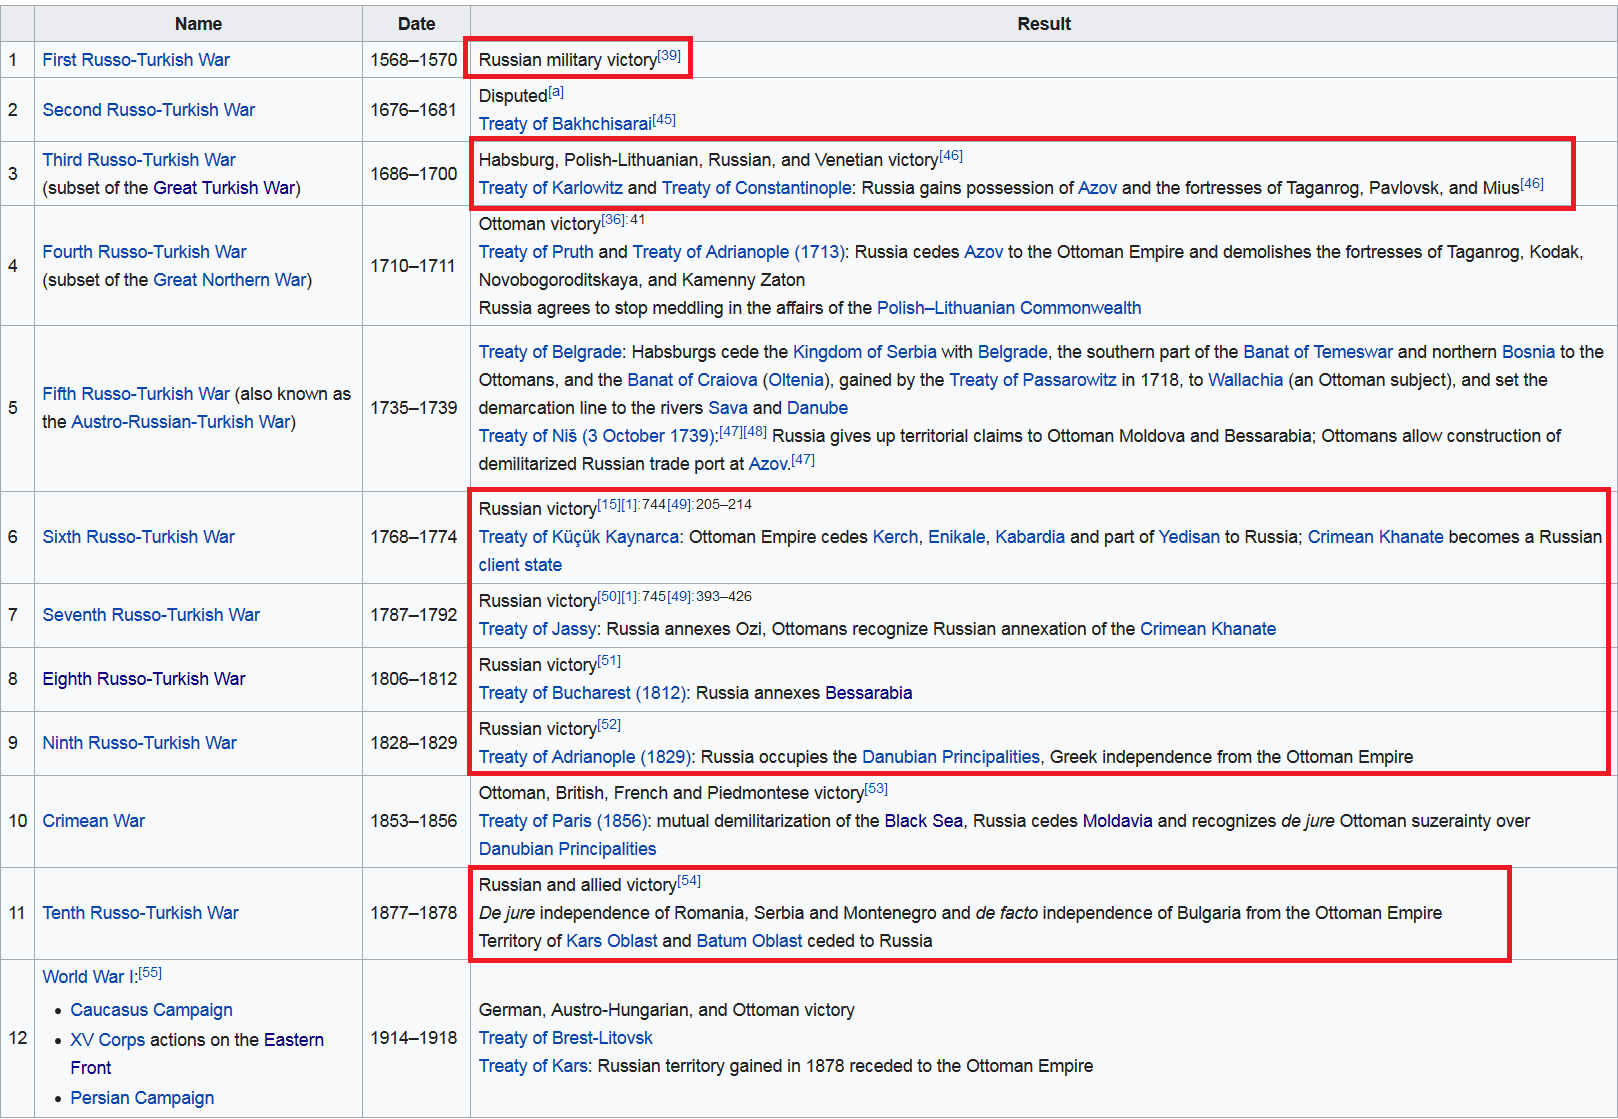 Screenshot_2021-12-07 History of the Russo-Turkish wars - Wikipedia.png